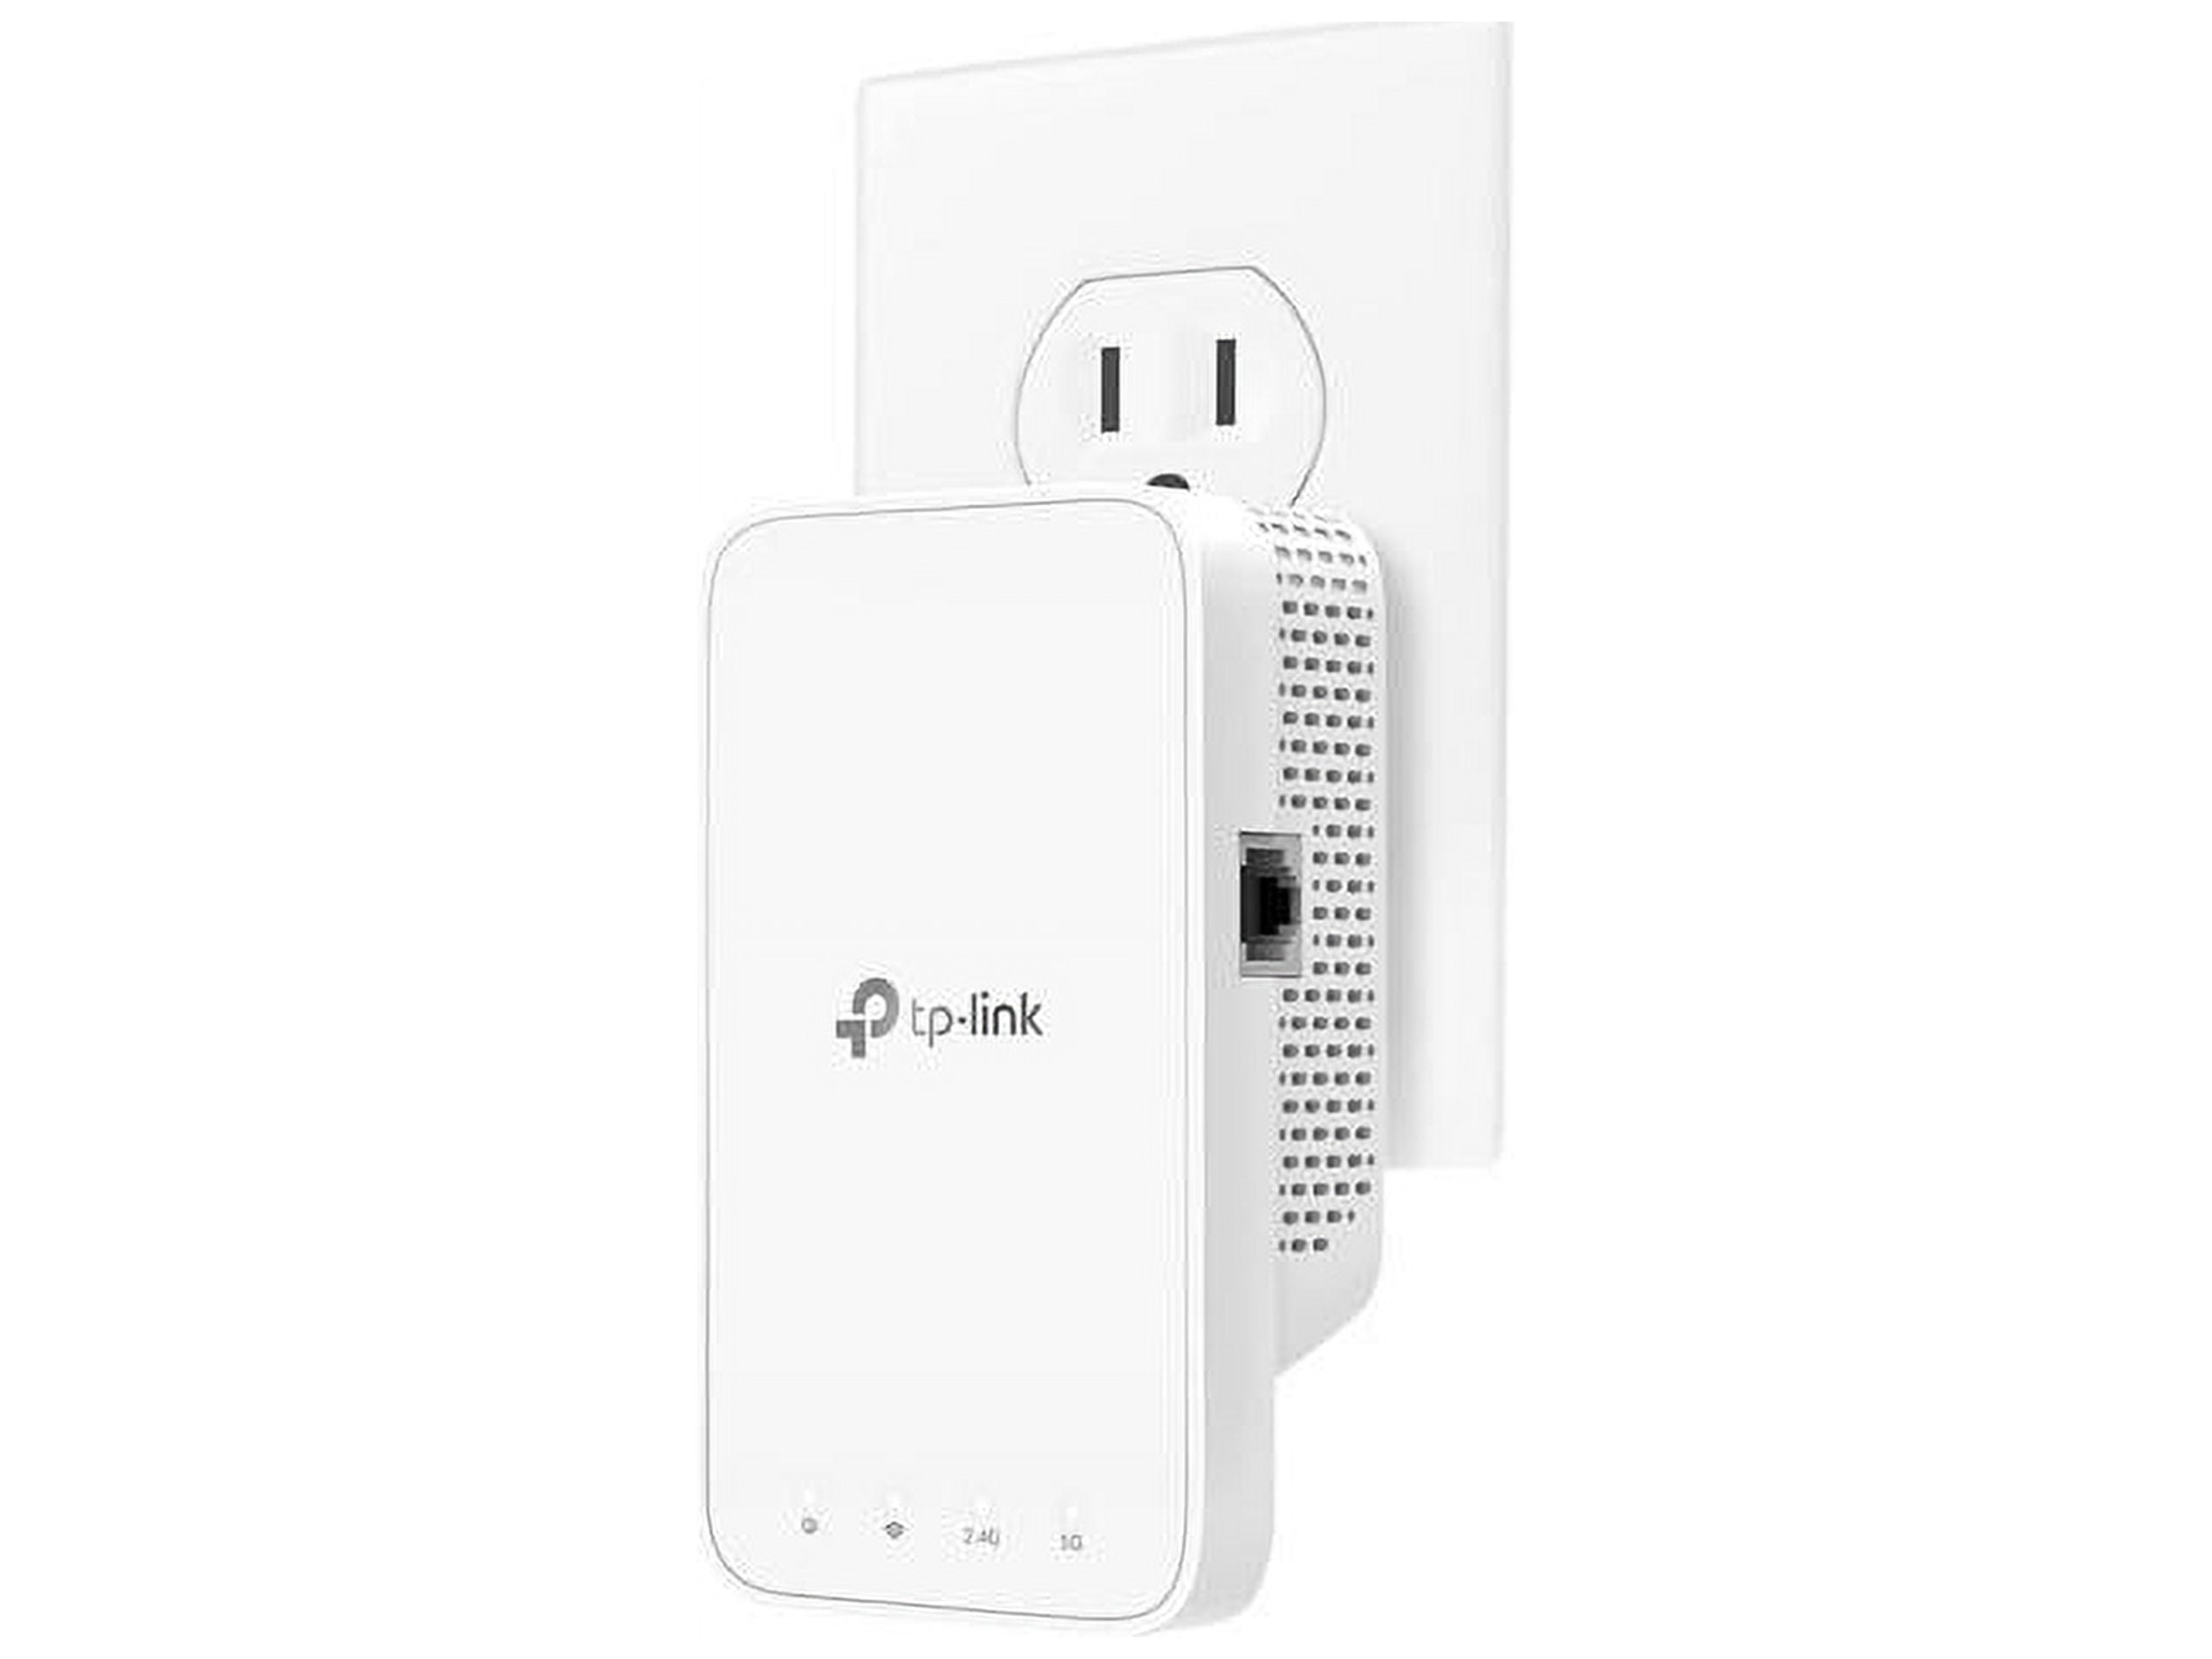 TP-Link WiFi Extender with Ethernet Port, 1.2Gbps signal booster, Dual Band  5GHz/2.4GHz, Up to 89% more bandwidth than single band, Covers Up to 1500